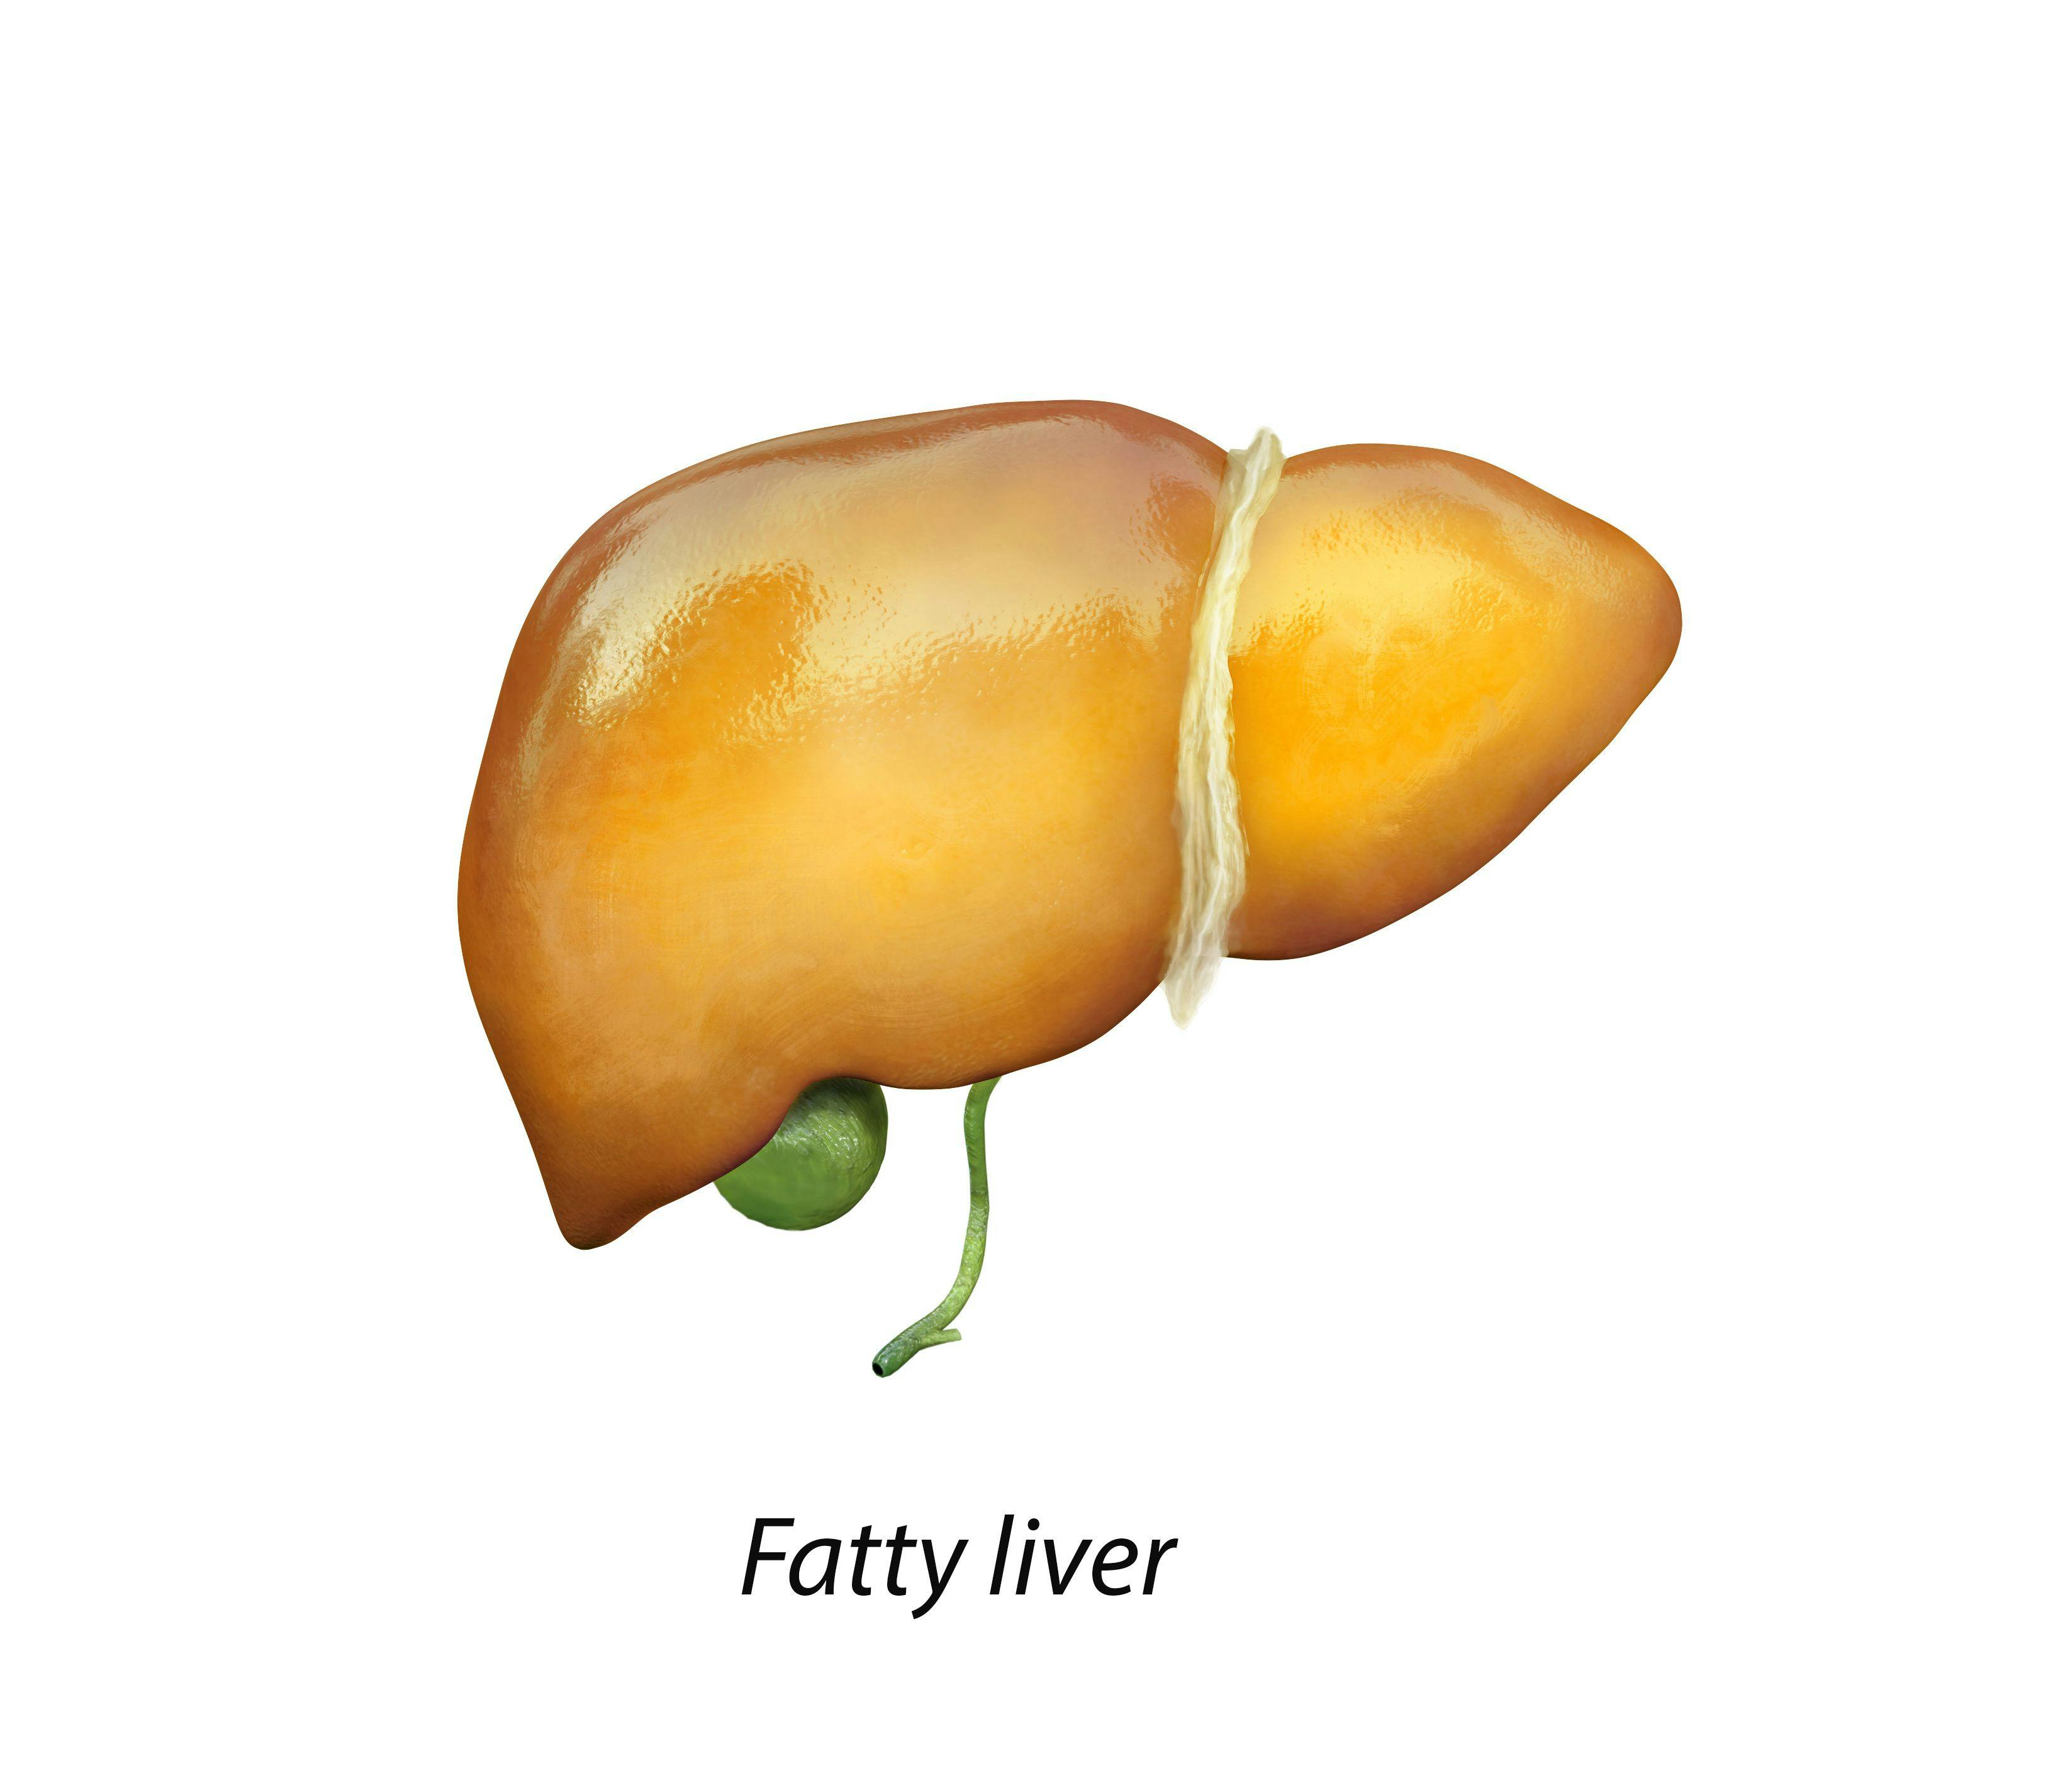 Positive Results for Resmetirom for Nonalcoholic Fatty Liver Disease